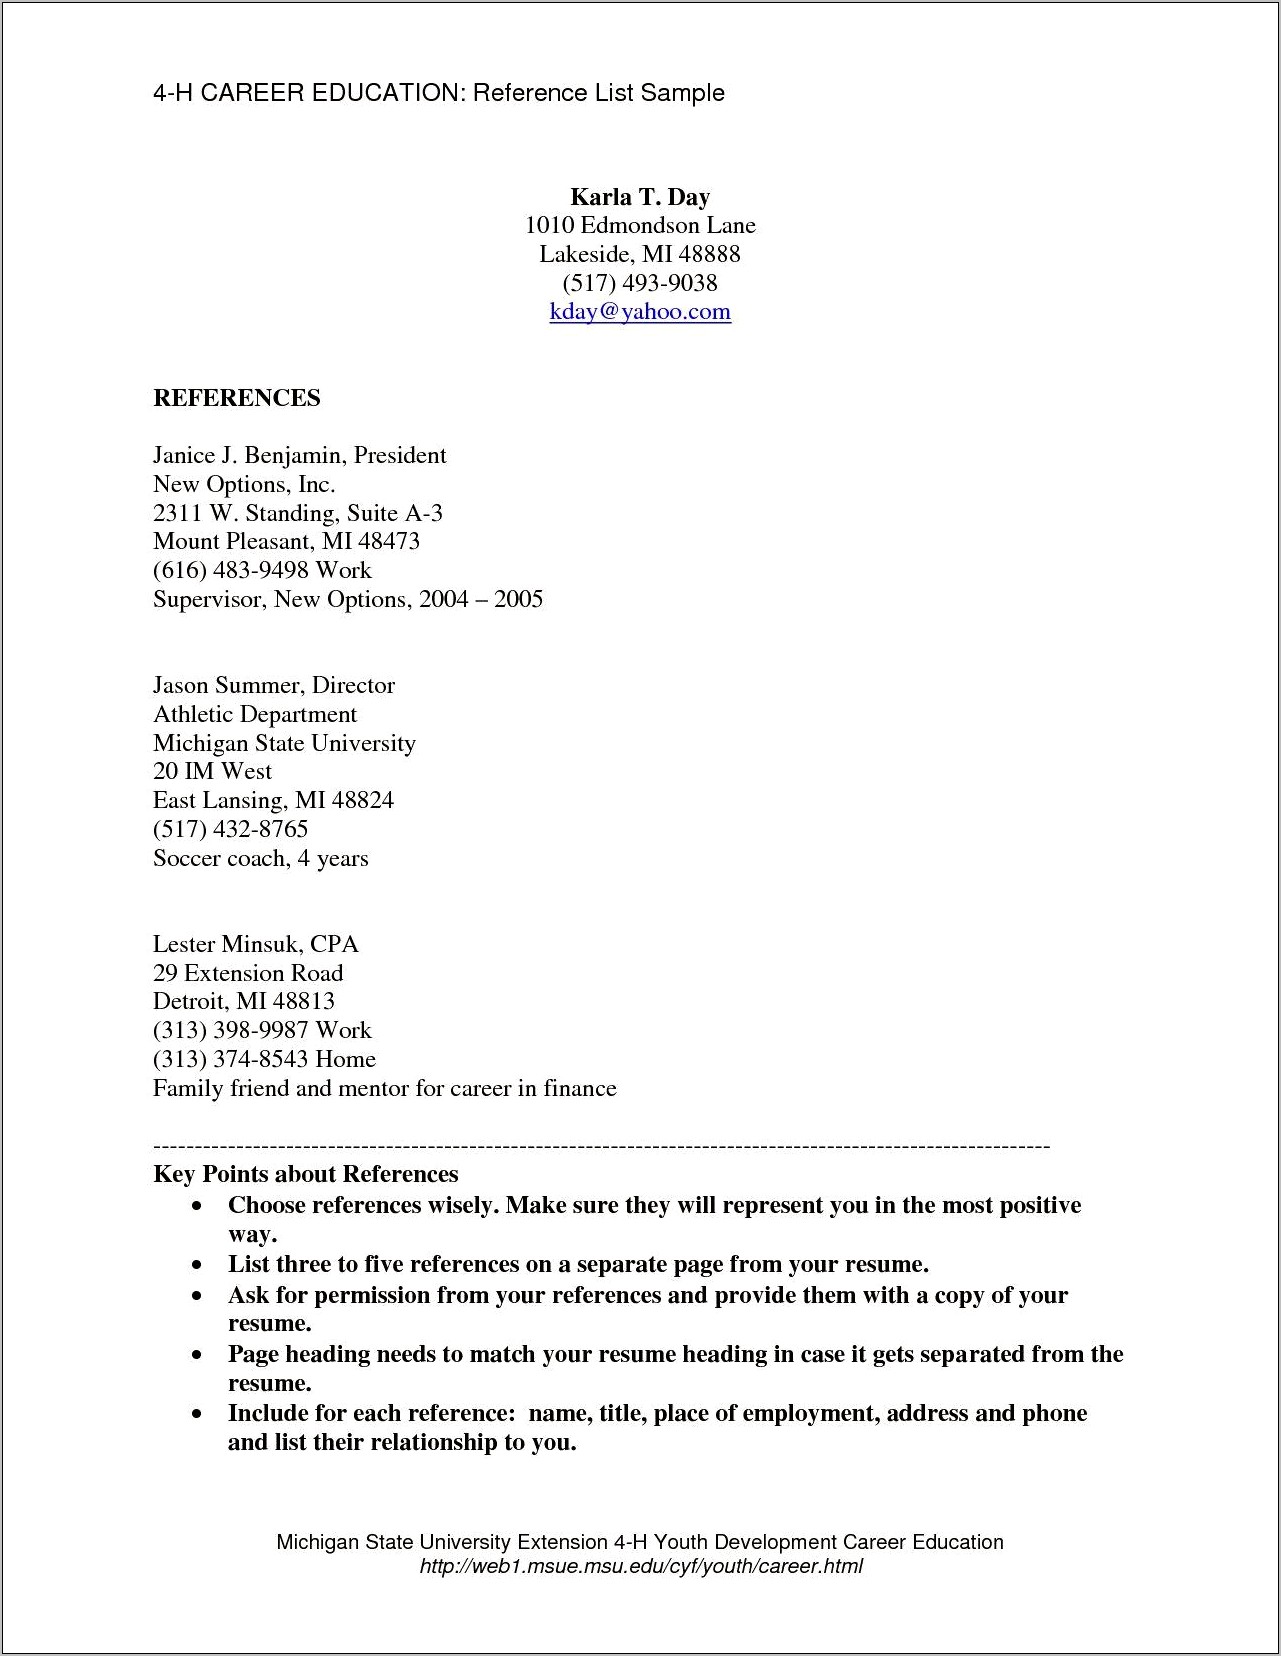 Examples Of Resume Reference List